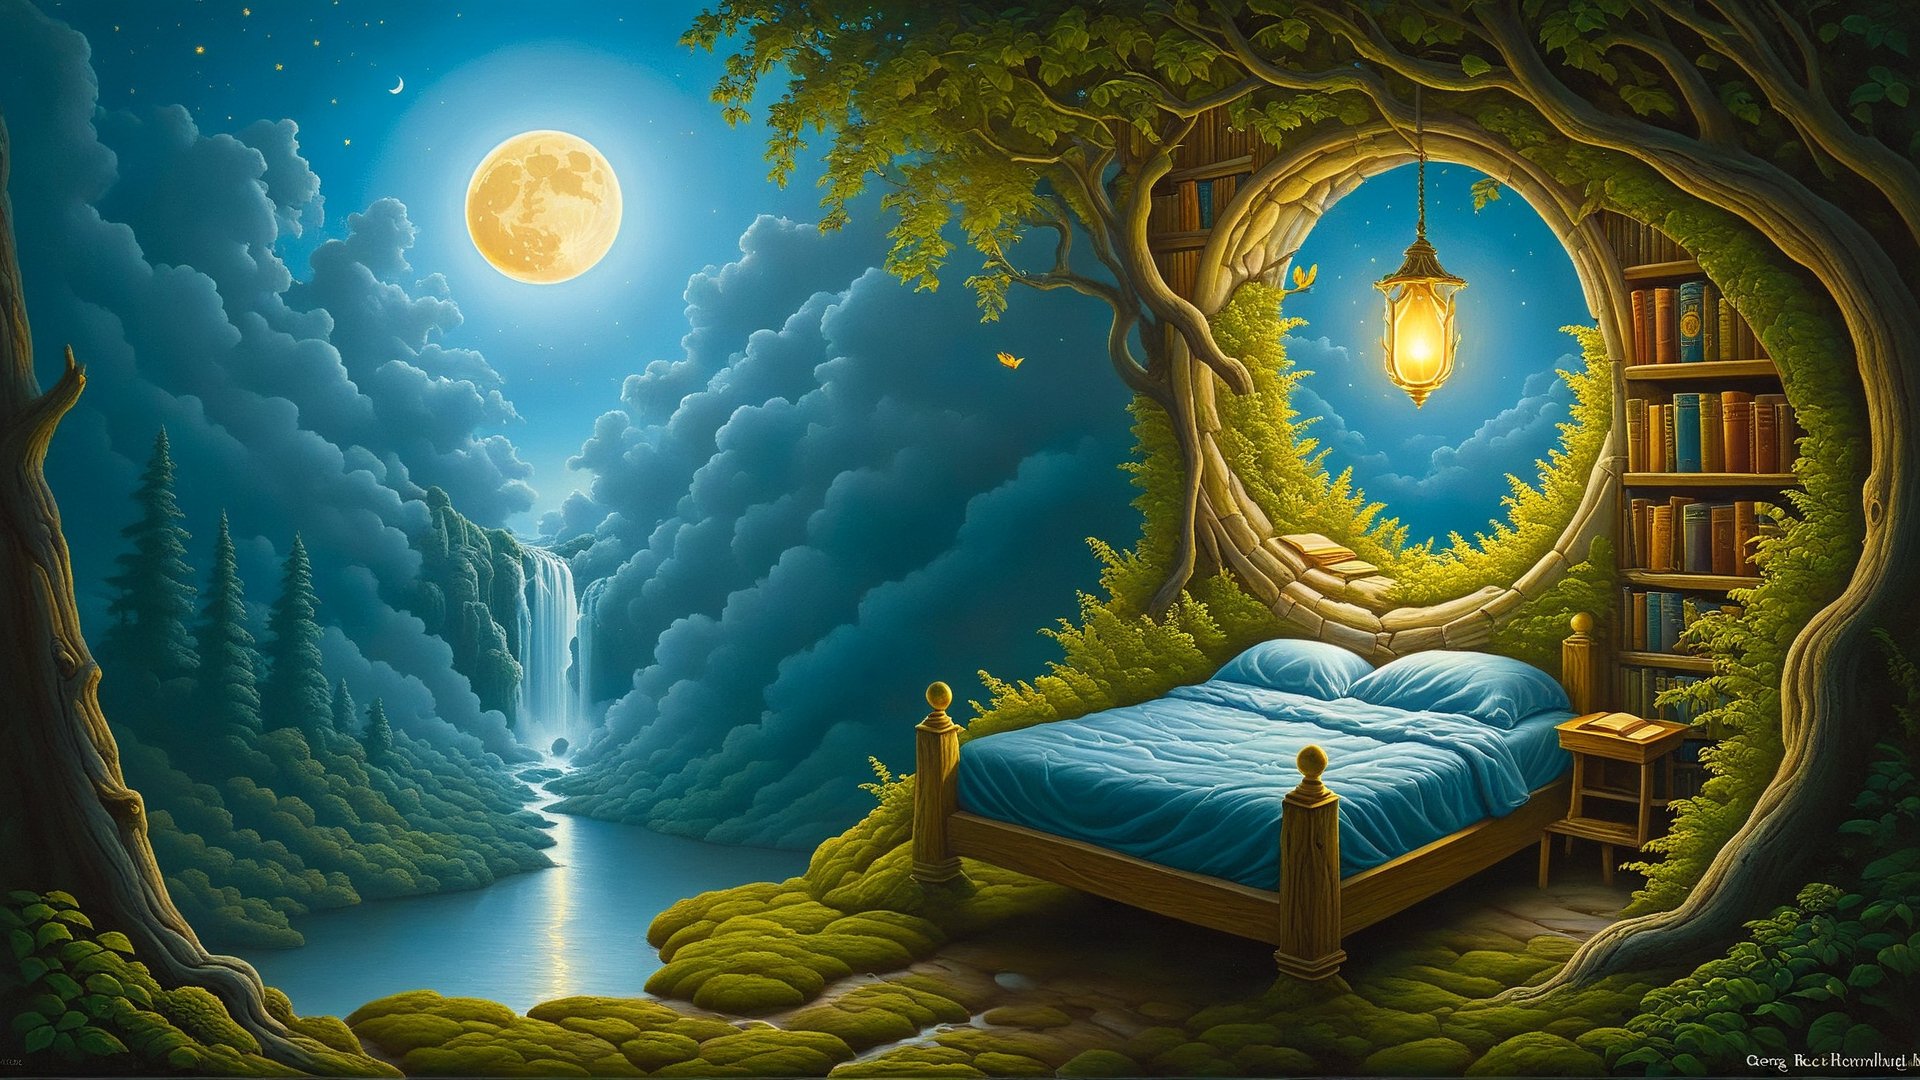 Surrealist art, (best quality, ultra-detailed, masterpiece), surrealism, gentle brushstrokes, solitary and tranquil world, memories of a journey through nature, alcove, bed, books, forest, night, moon melting into waterfall, firefly lamp, fantasy landscape, Greg Rutkowski, Jacek Yerka, Vladimir Kush, Rob Gonsalves, surreal art, oil paint, surreal background,